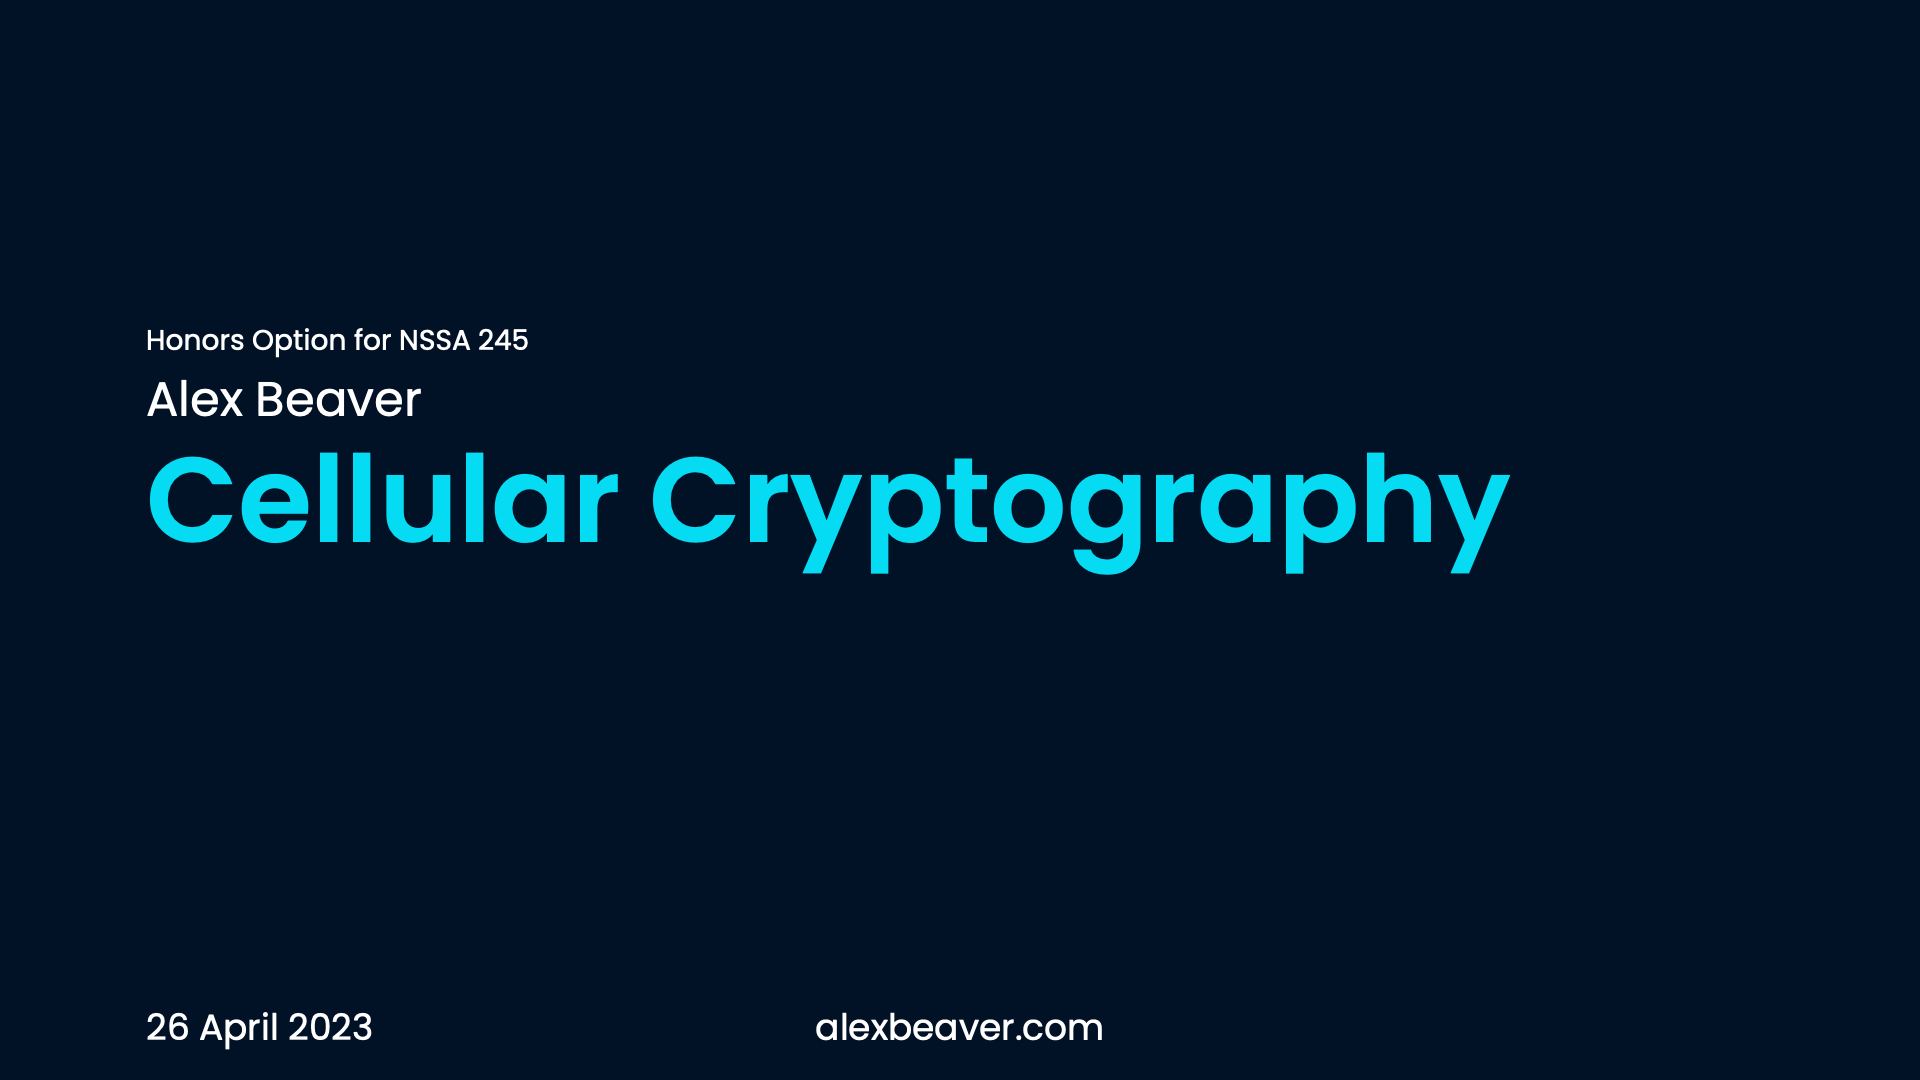 Cellular Cryptography